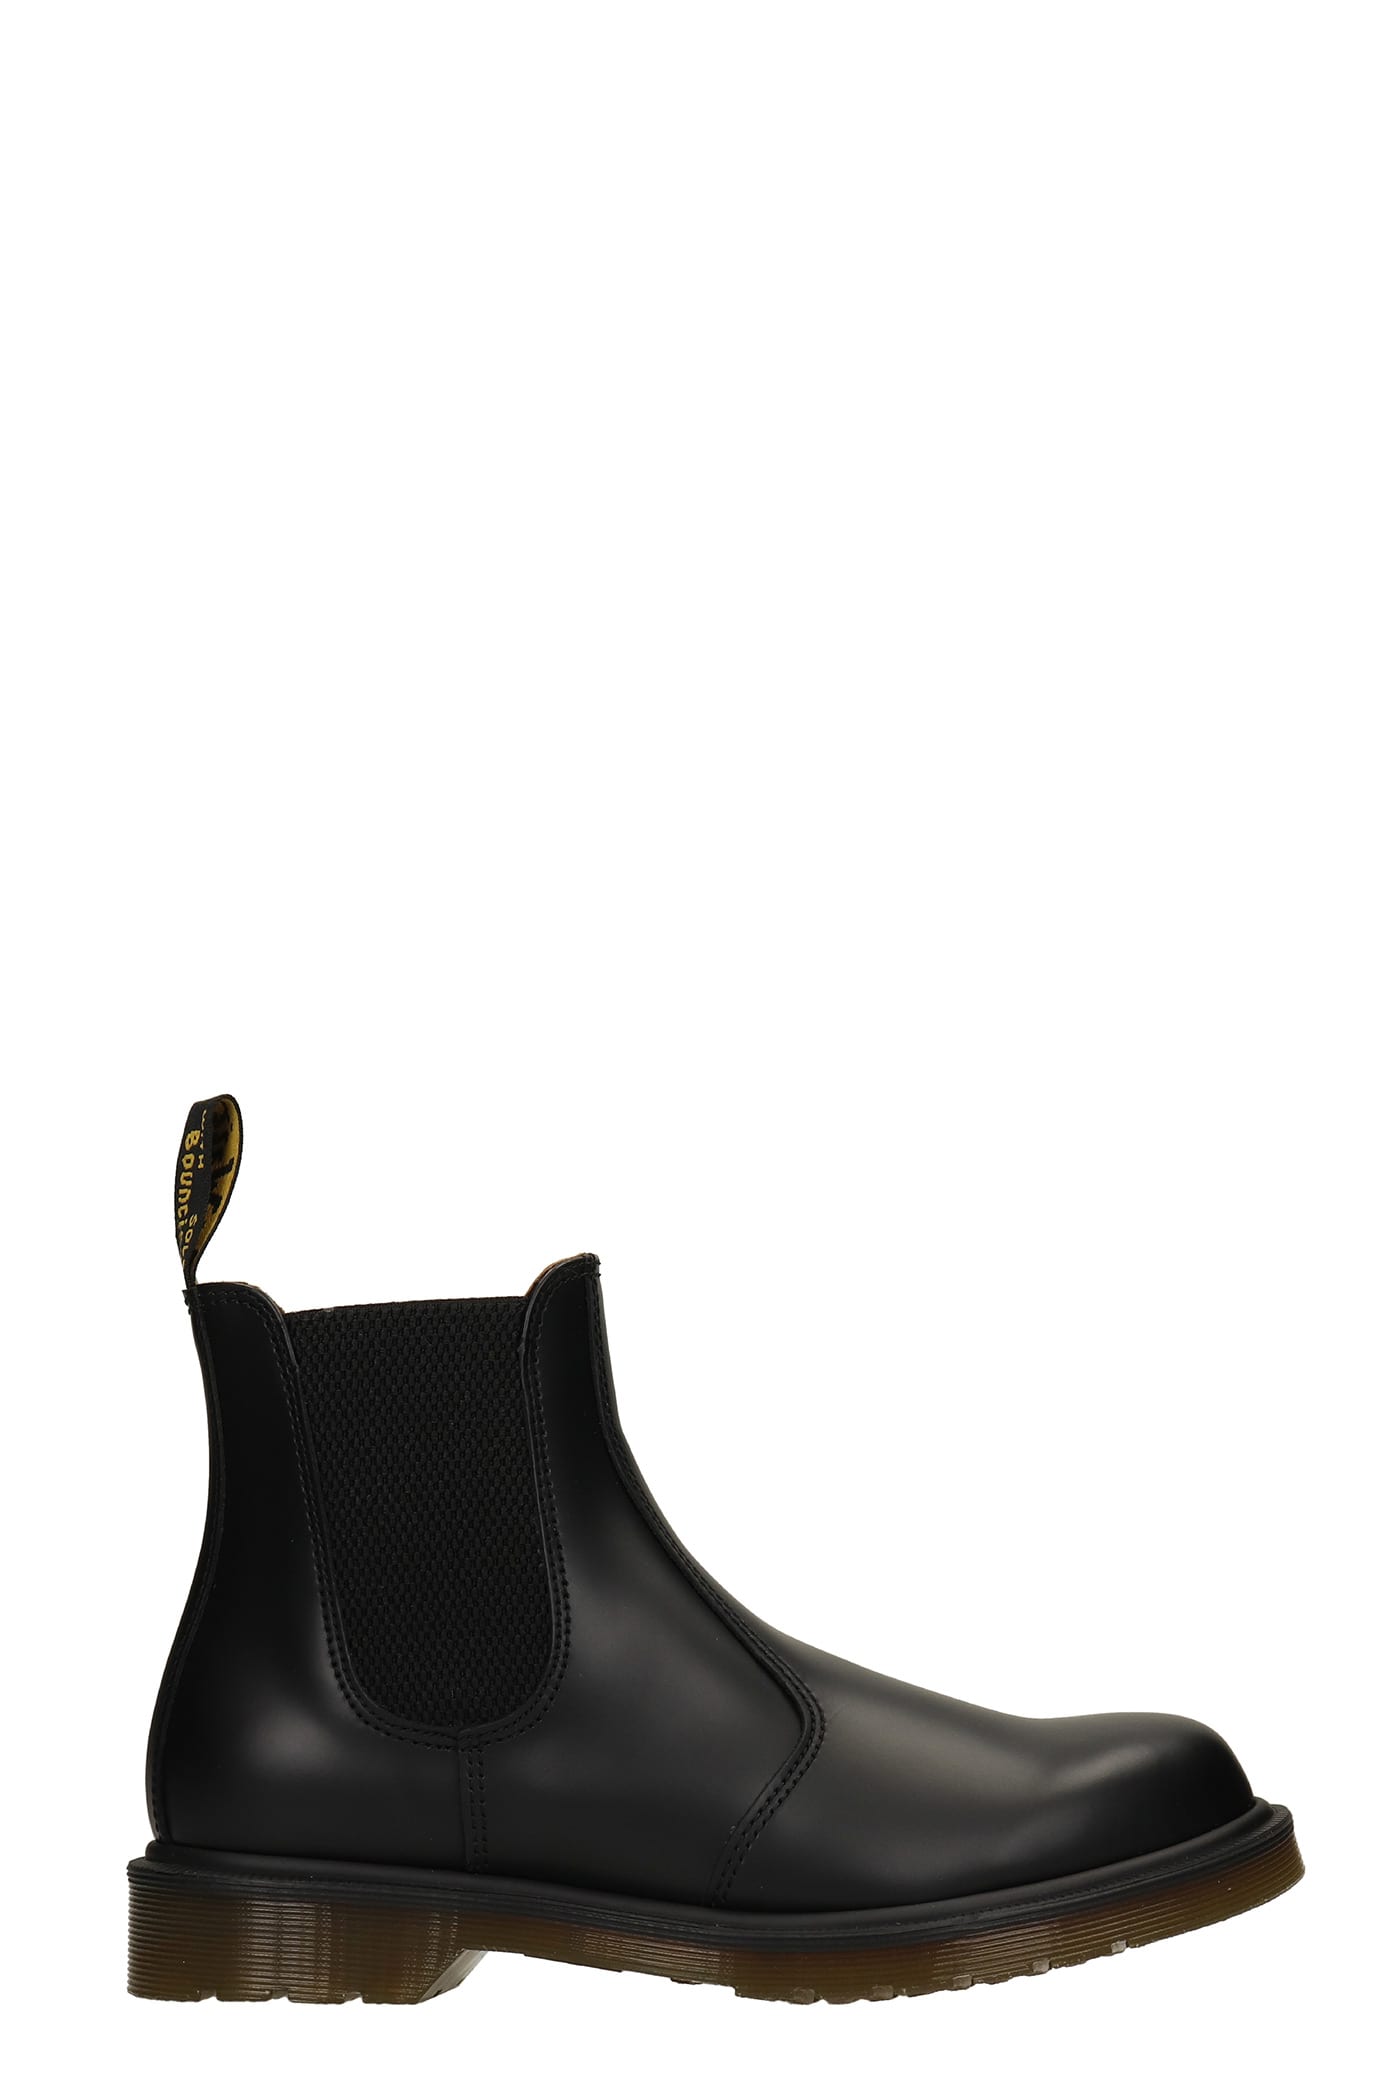 Dr. Martens 2976 Combat Boots In Black Leather